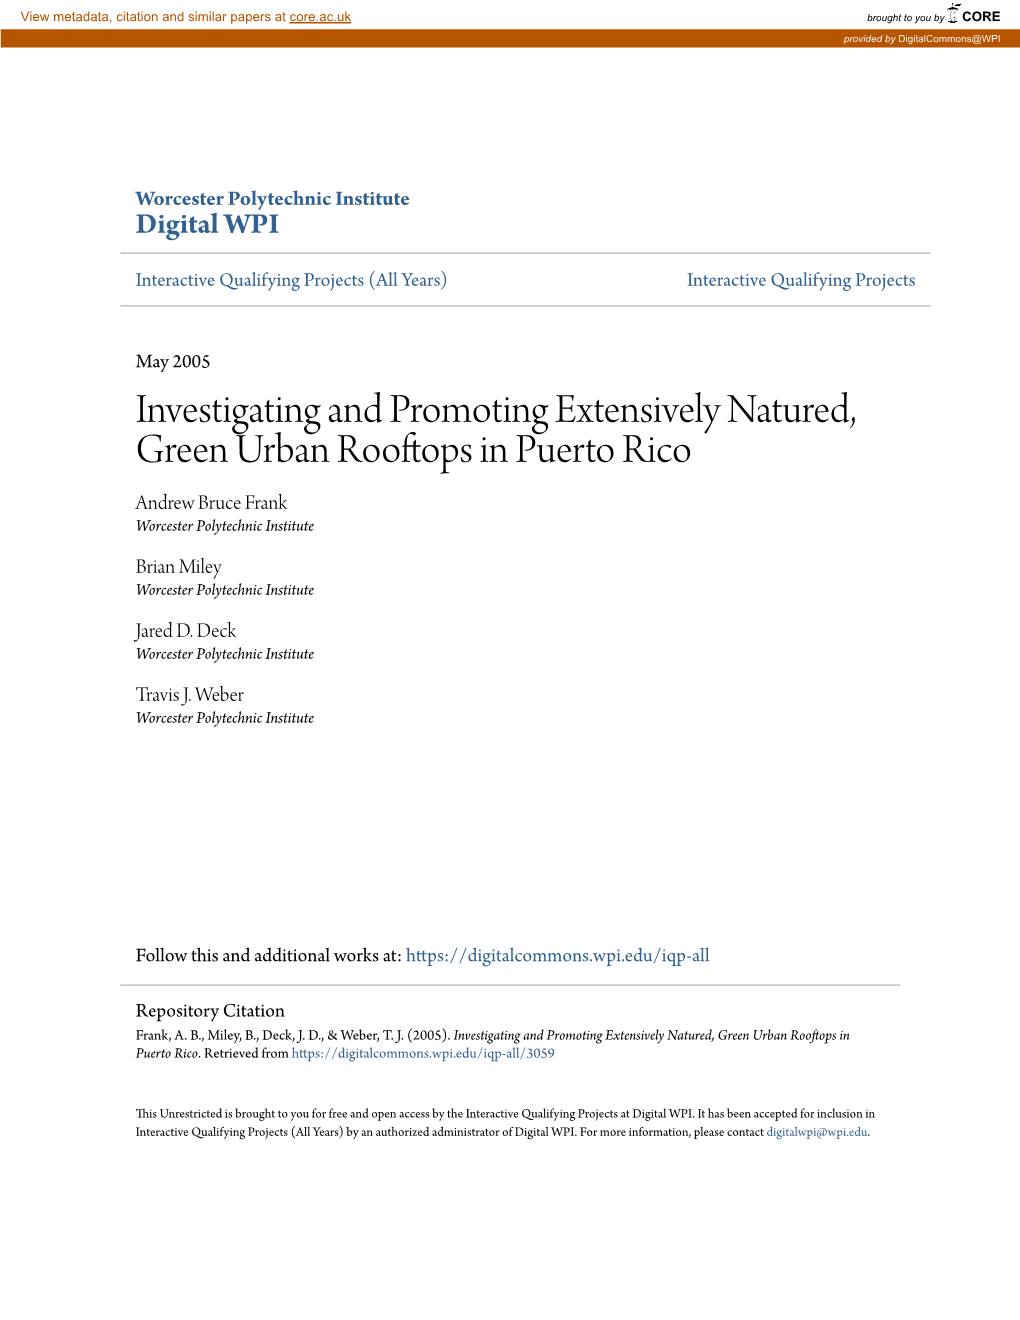 Investigating and Promoting Extensively Natured, Green Urban Rooftops in Puerto Rico Andrew Bruce Frank Worcester Polytechnic Institute